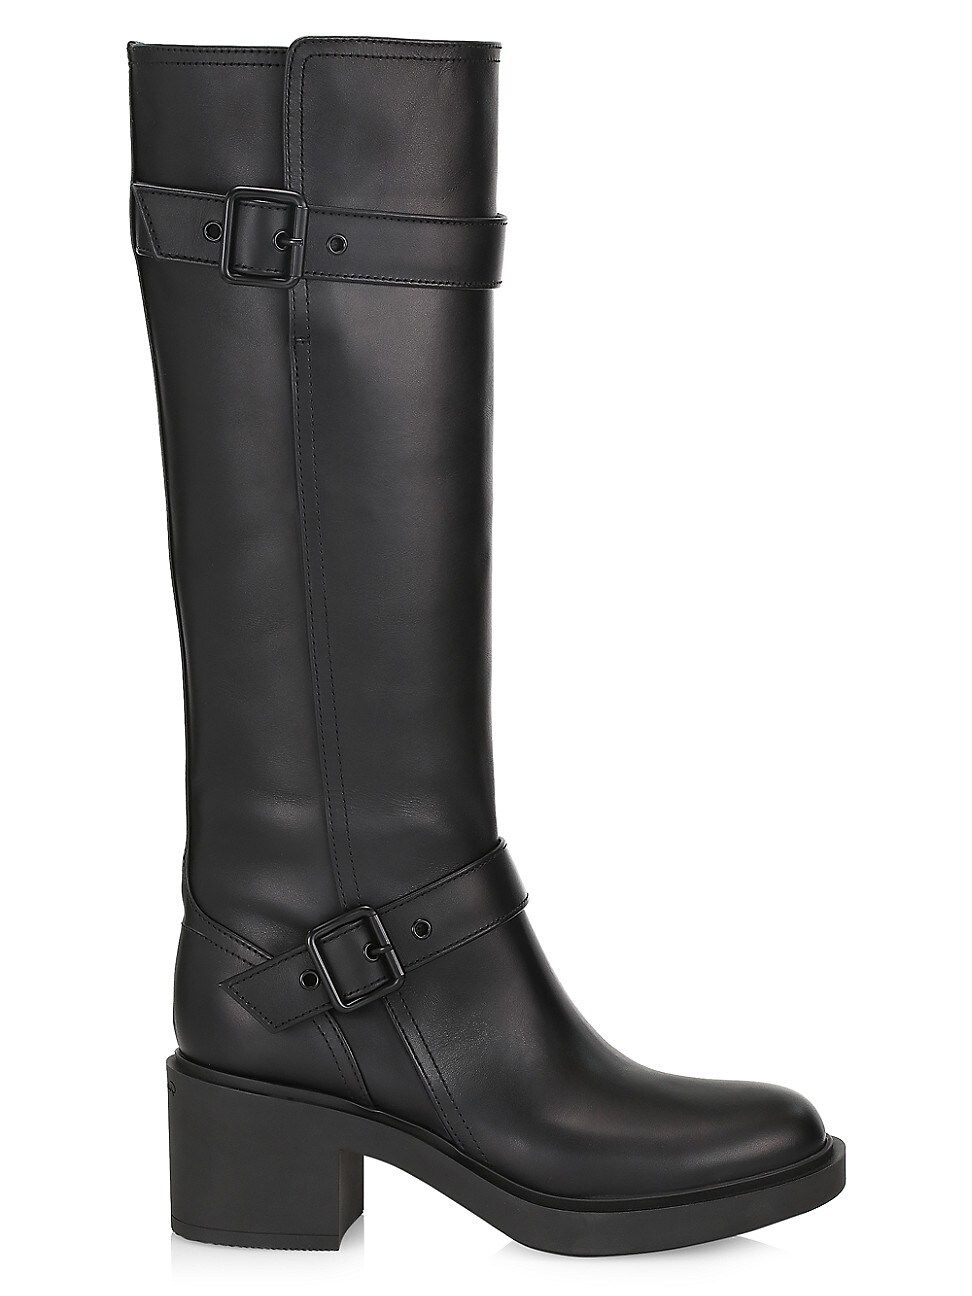 Gianvito Rossi Ryder Leather Knee-High Boots | Saks Fifth Avenue